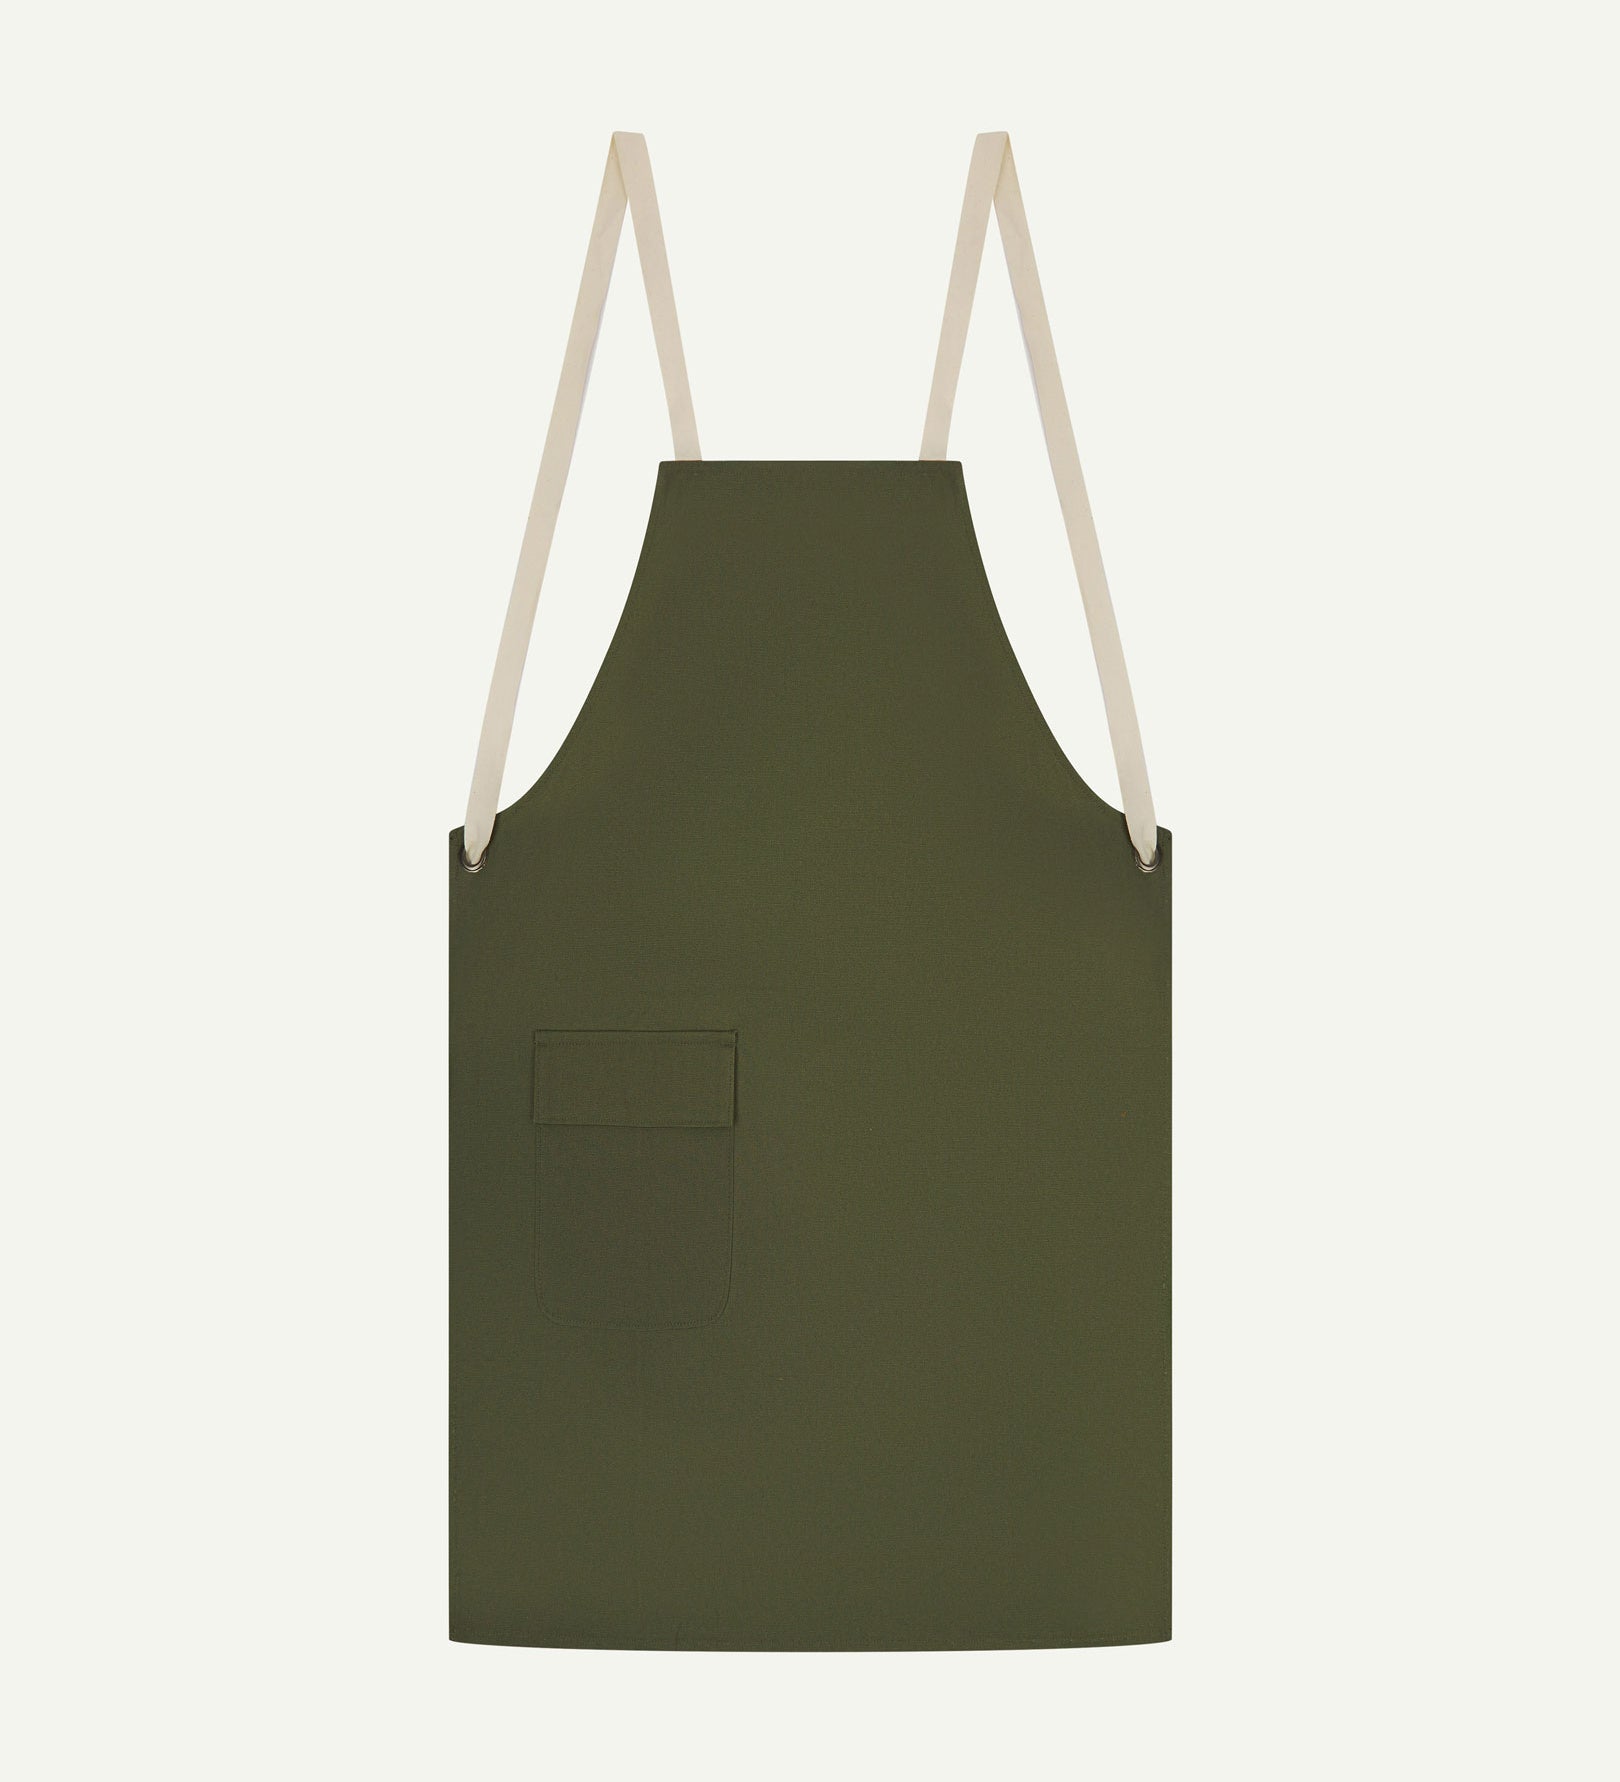 Flat shot of Uskees green canvas apron showing cream straps and front flap pocket.